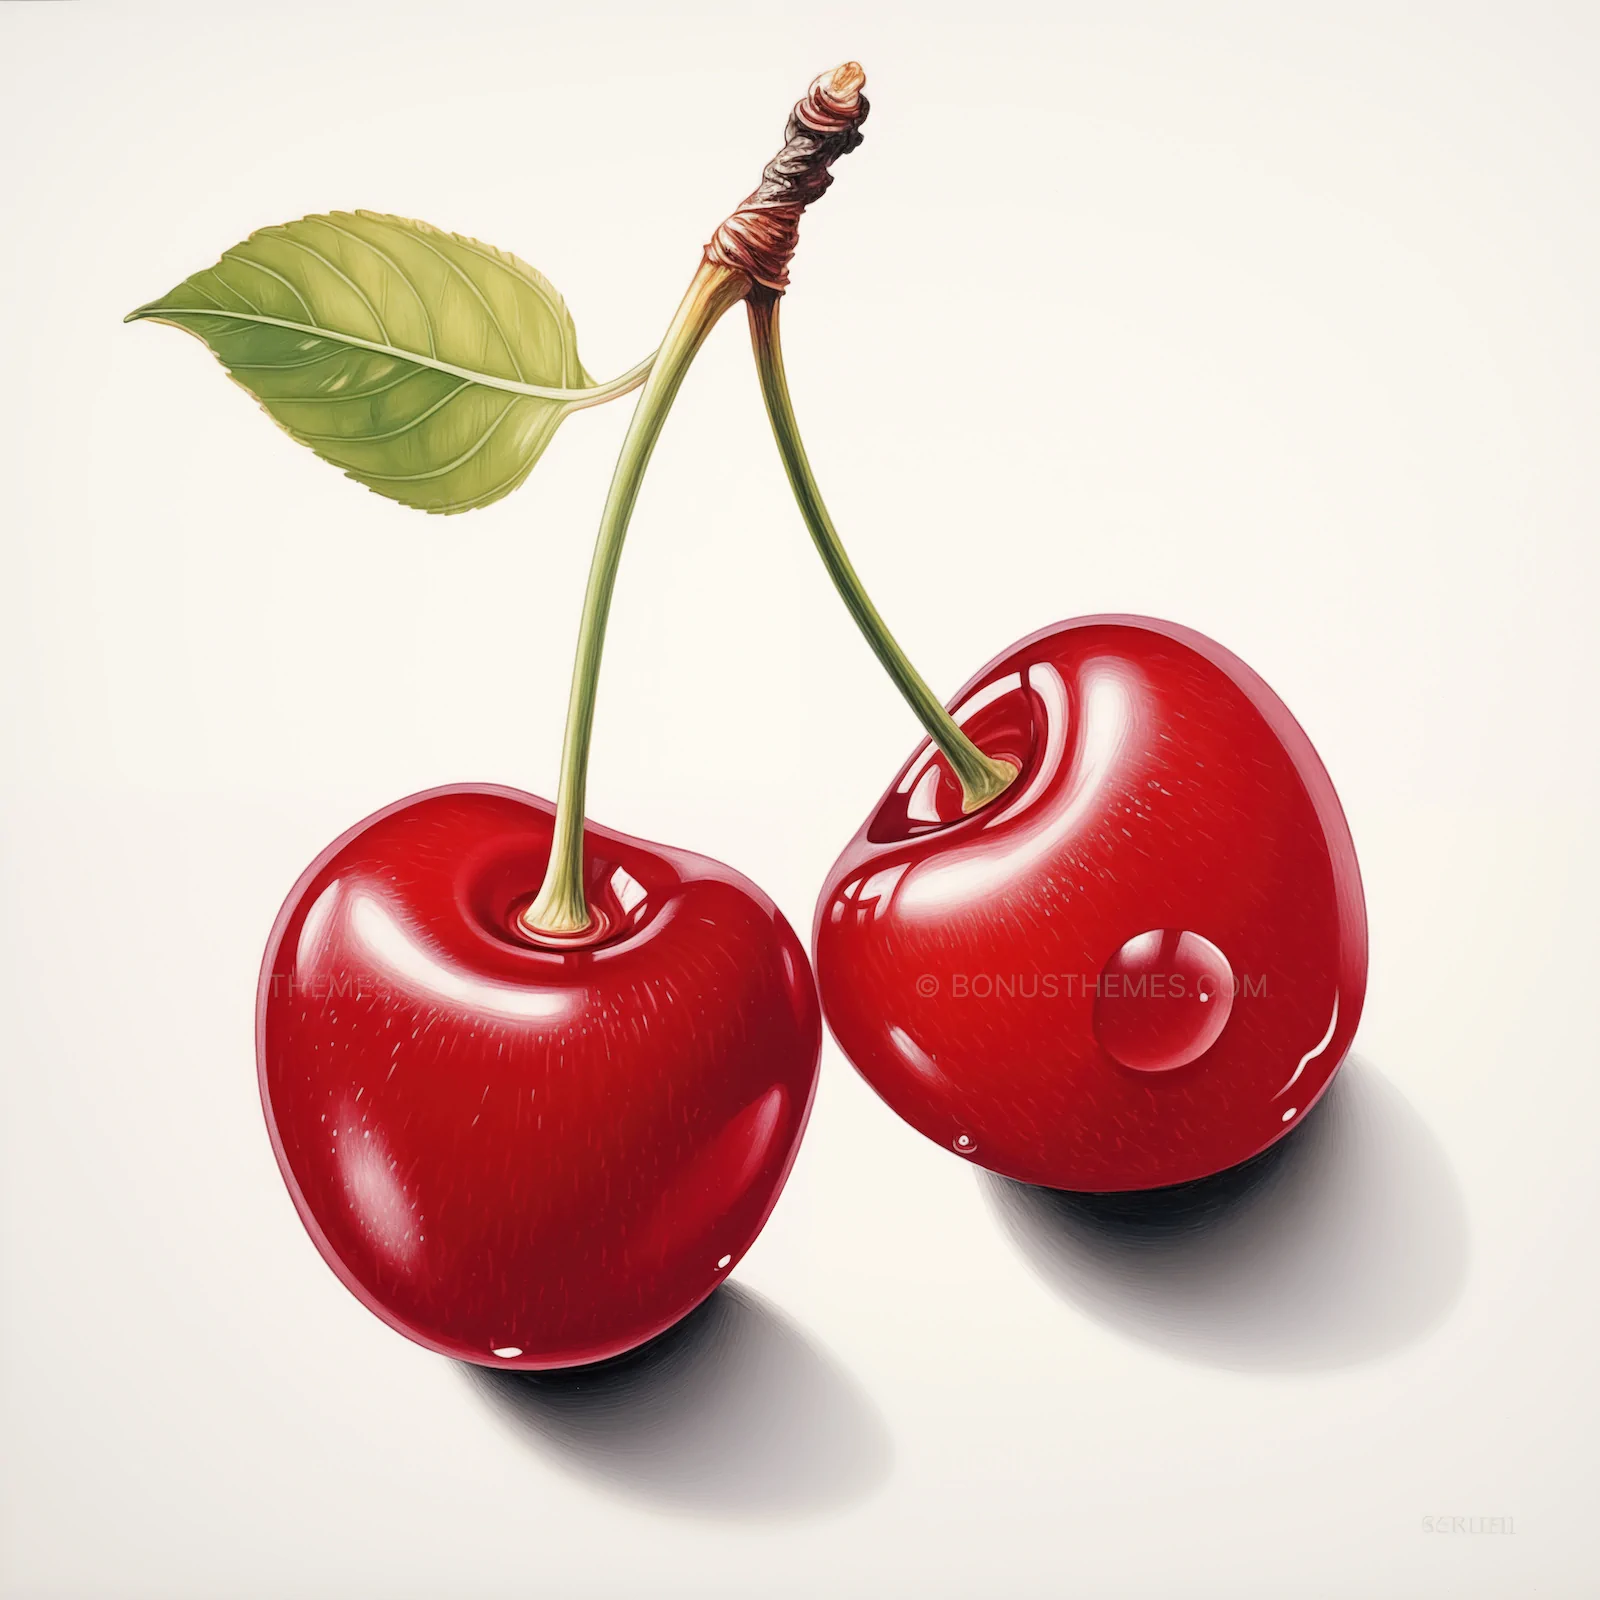 Two cherries on isolated white background